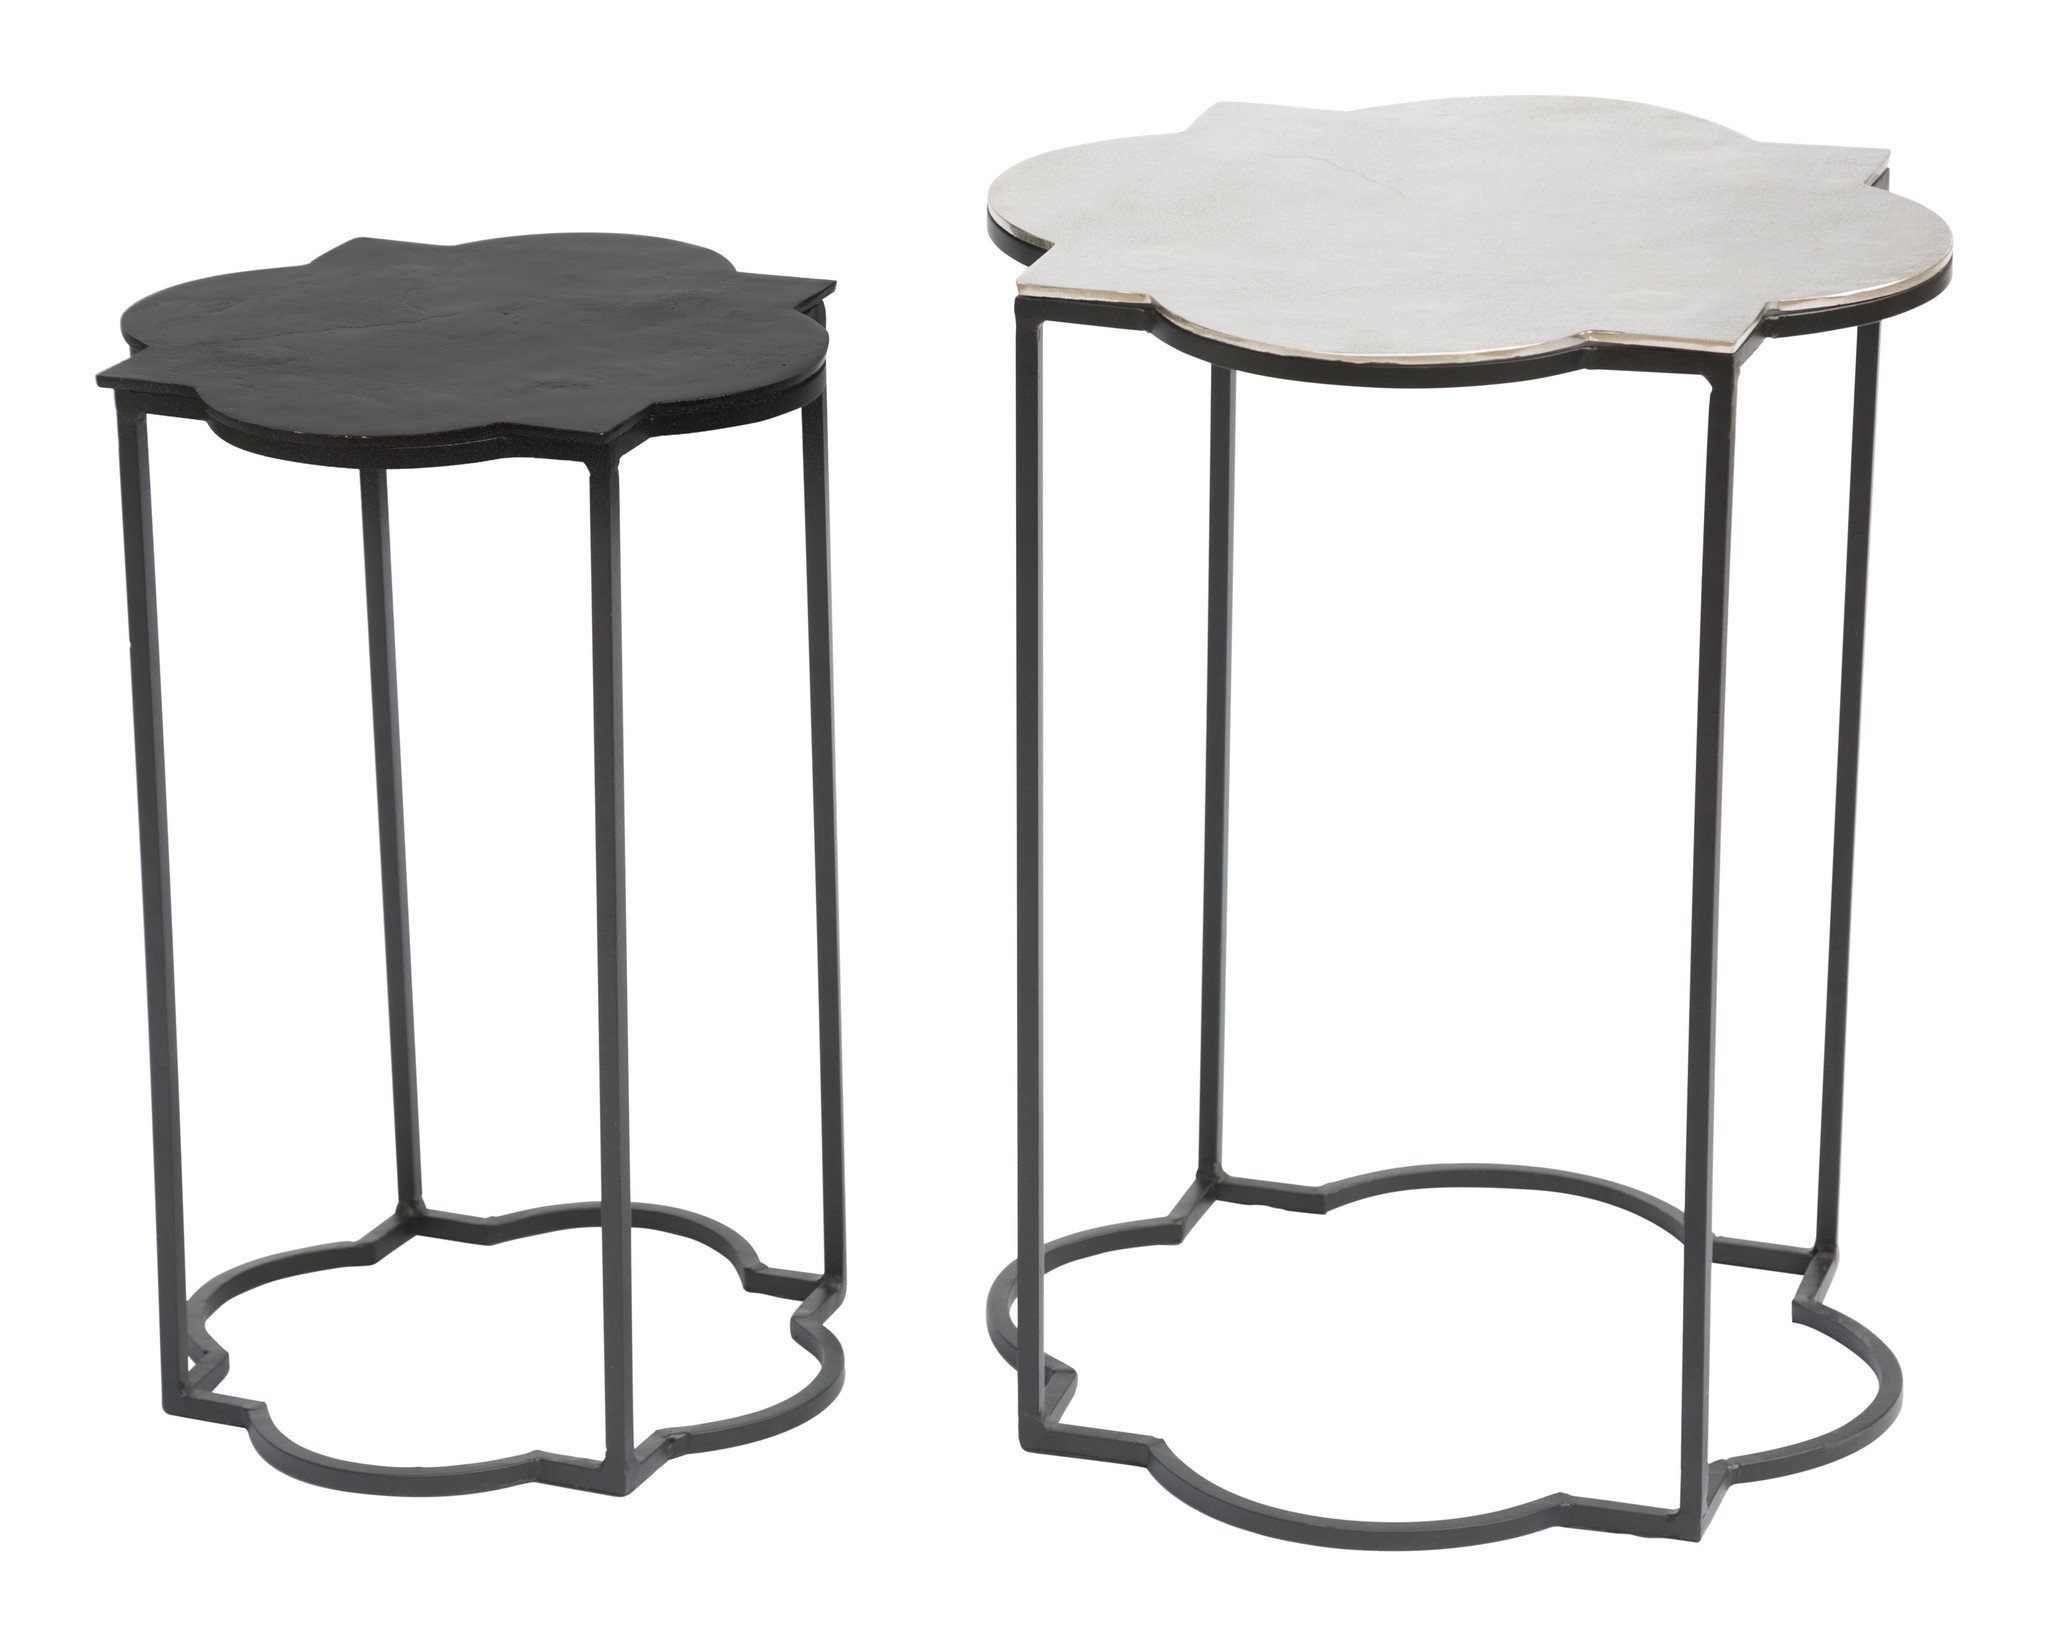 modern contemporary rustic vintage side end tables alan decor brighton accent table set black white xxl dog cage ikea glass top tall nesting west elm couch bean laura ashley lamps